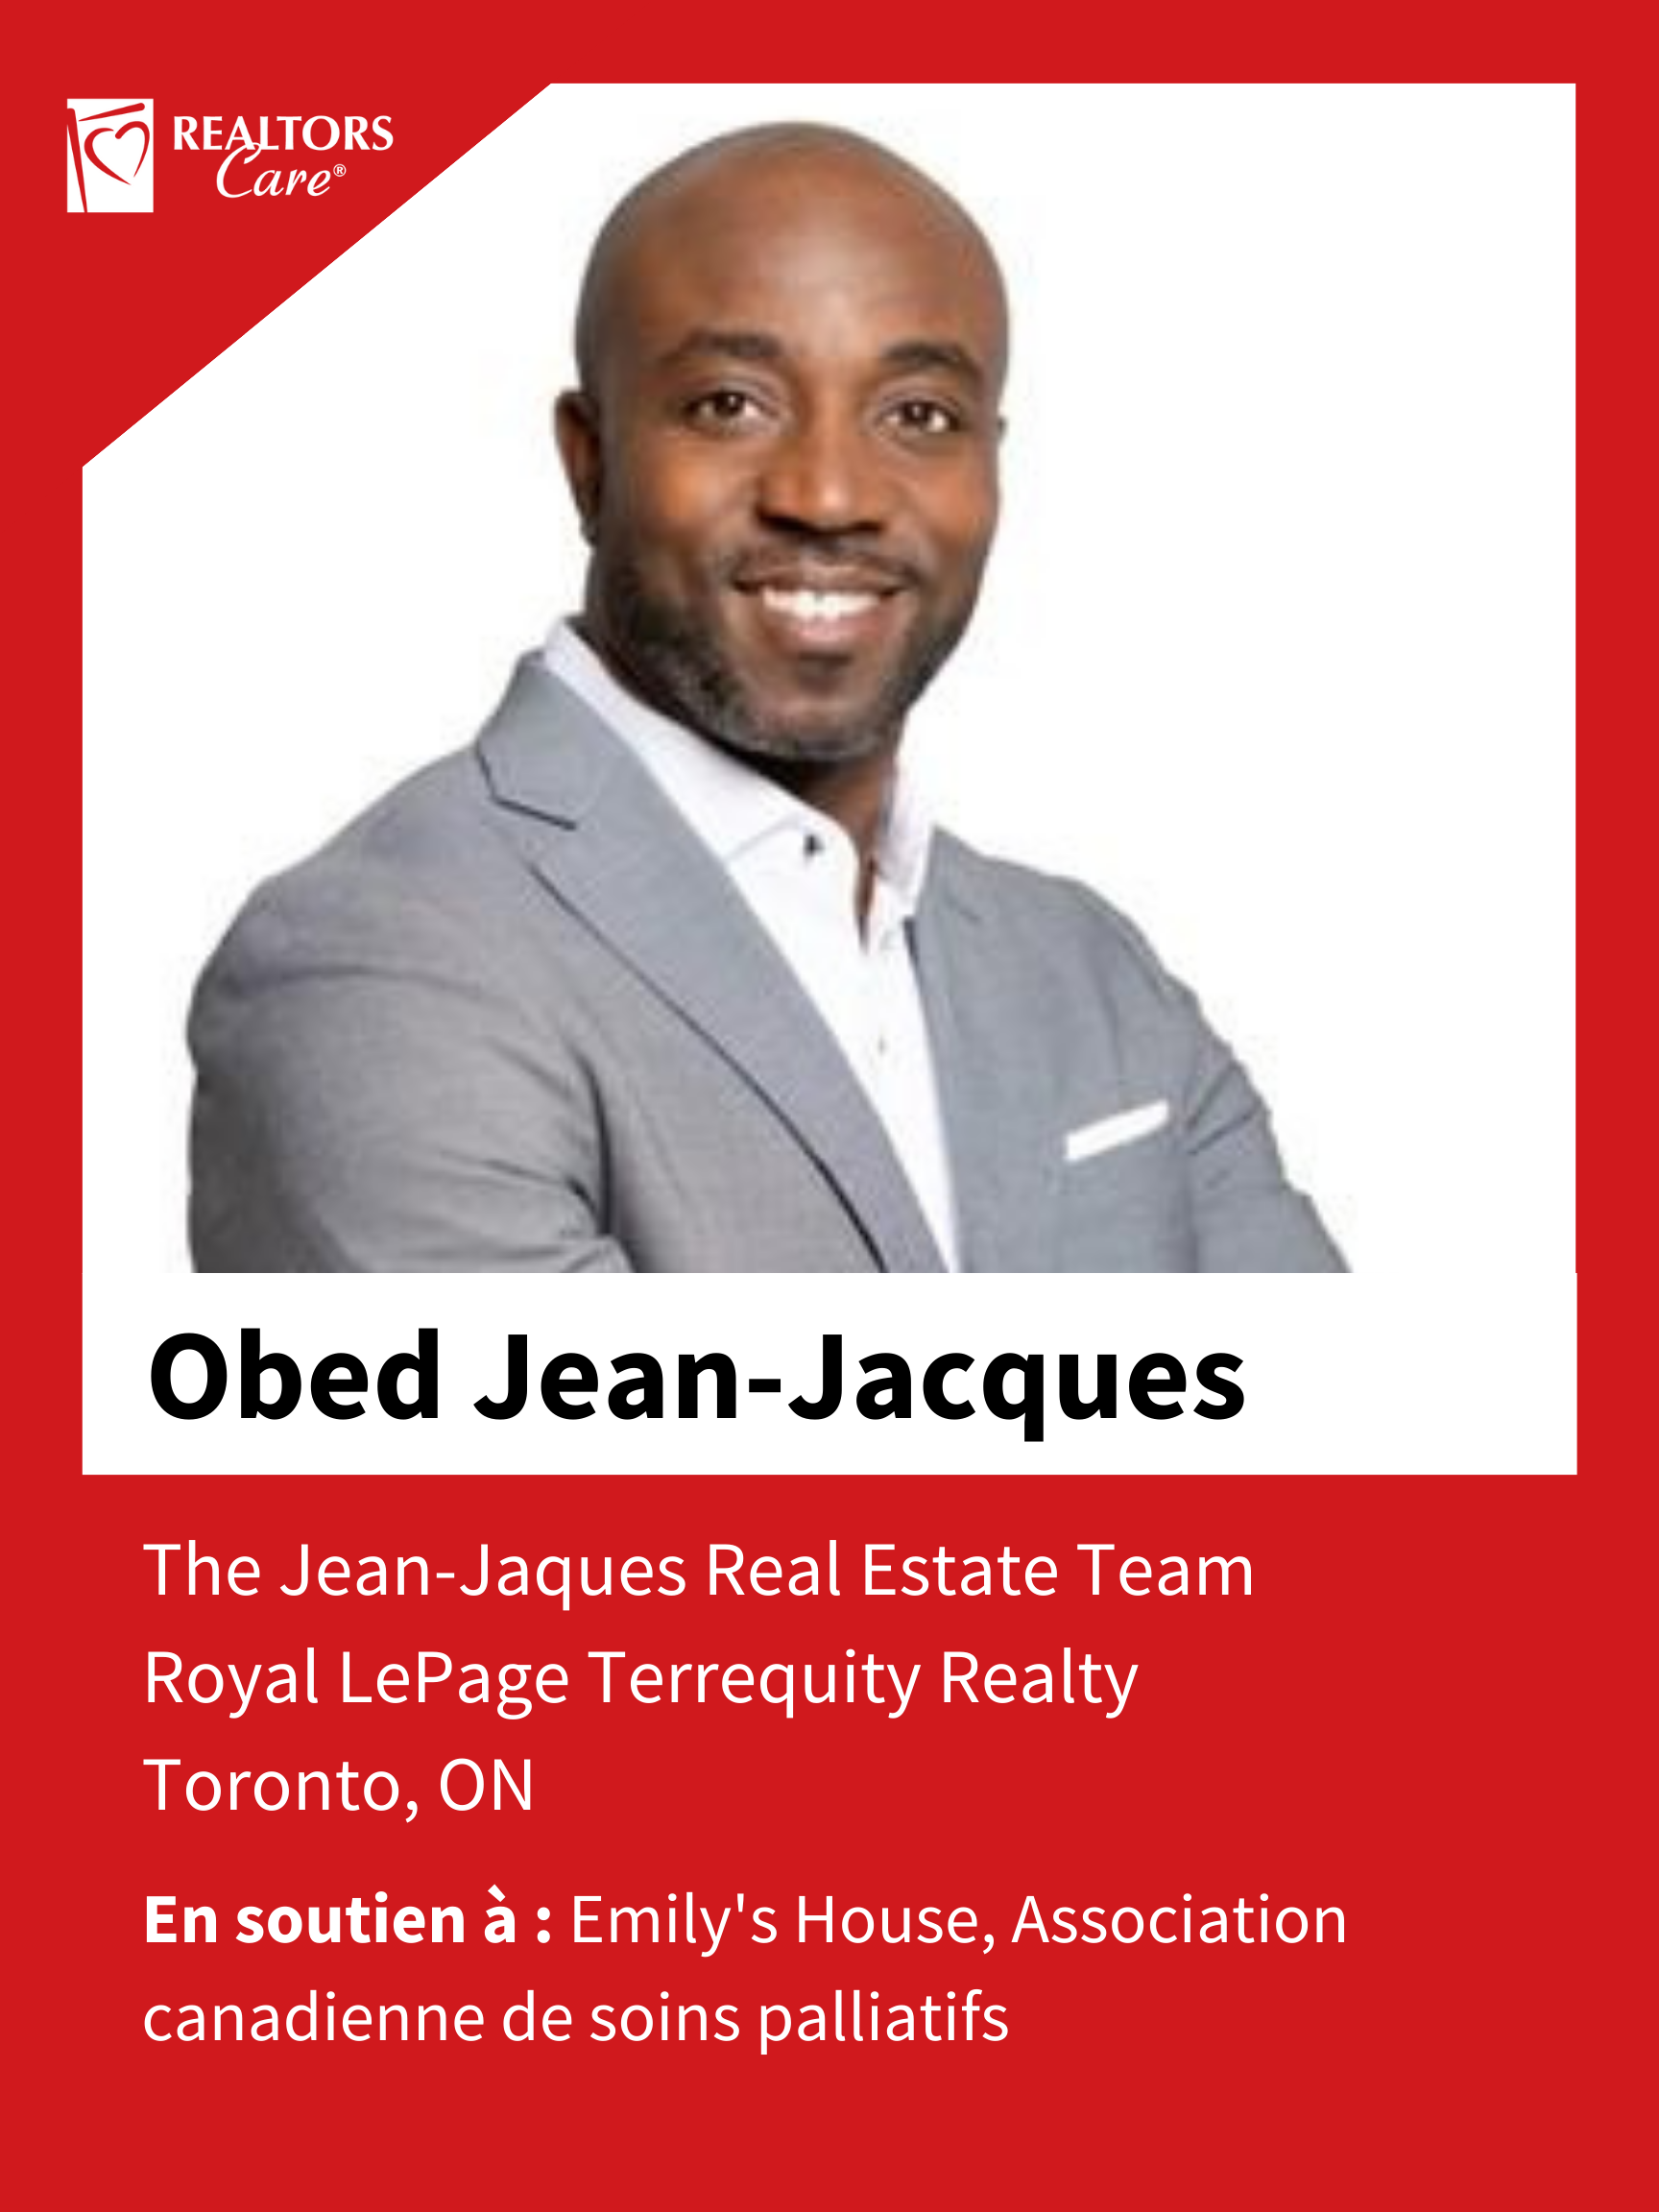 Obed Jean-Jacques
Toronto	ON
